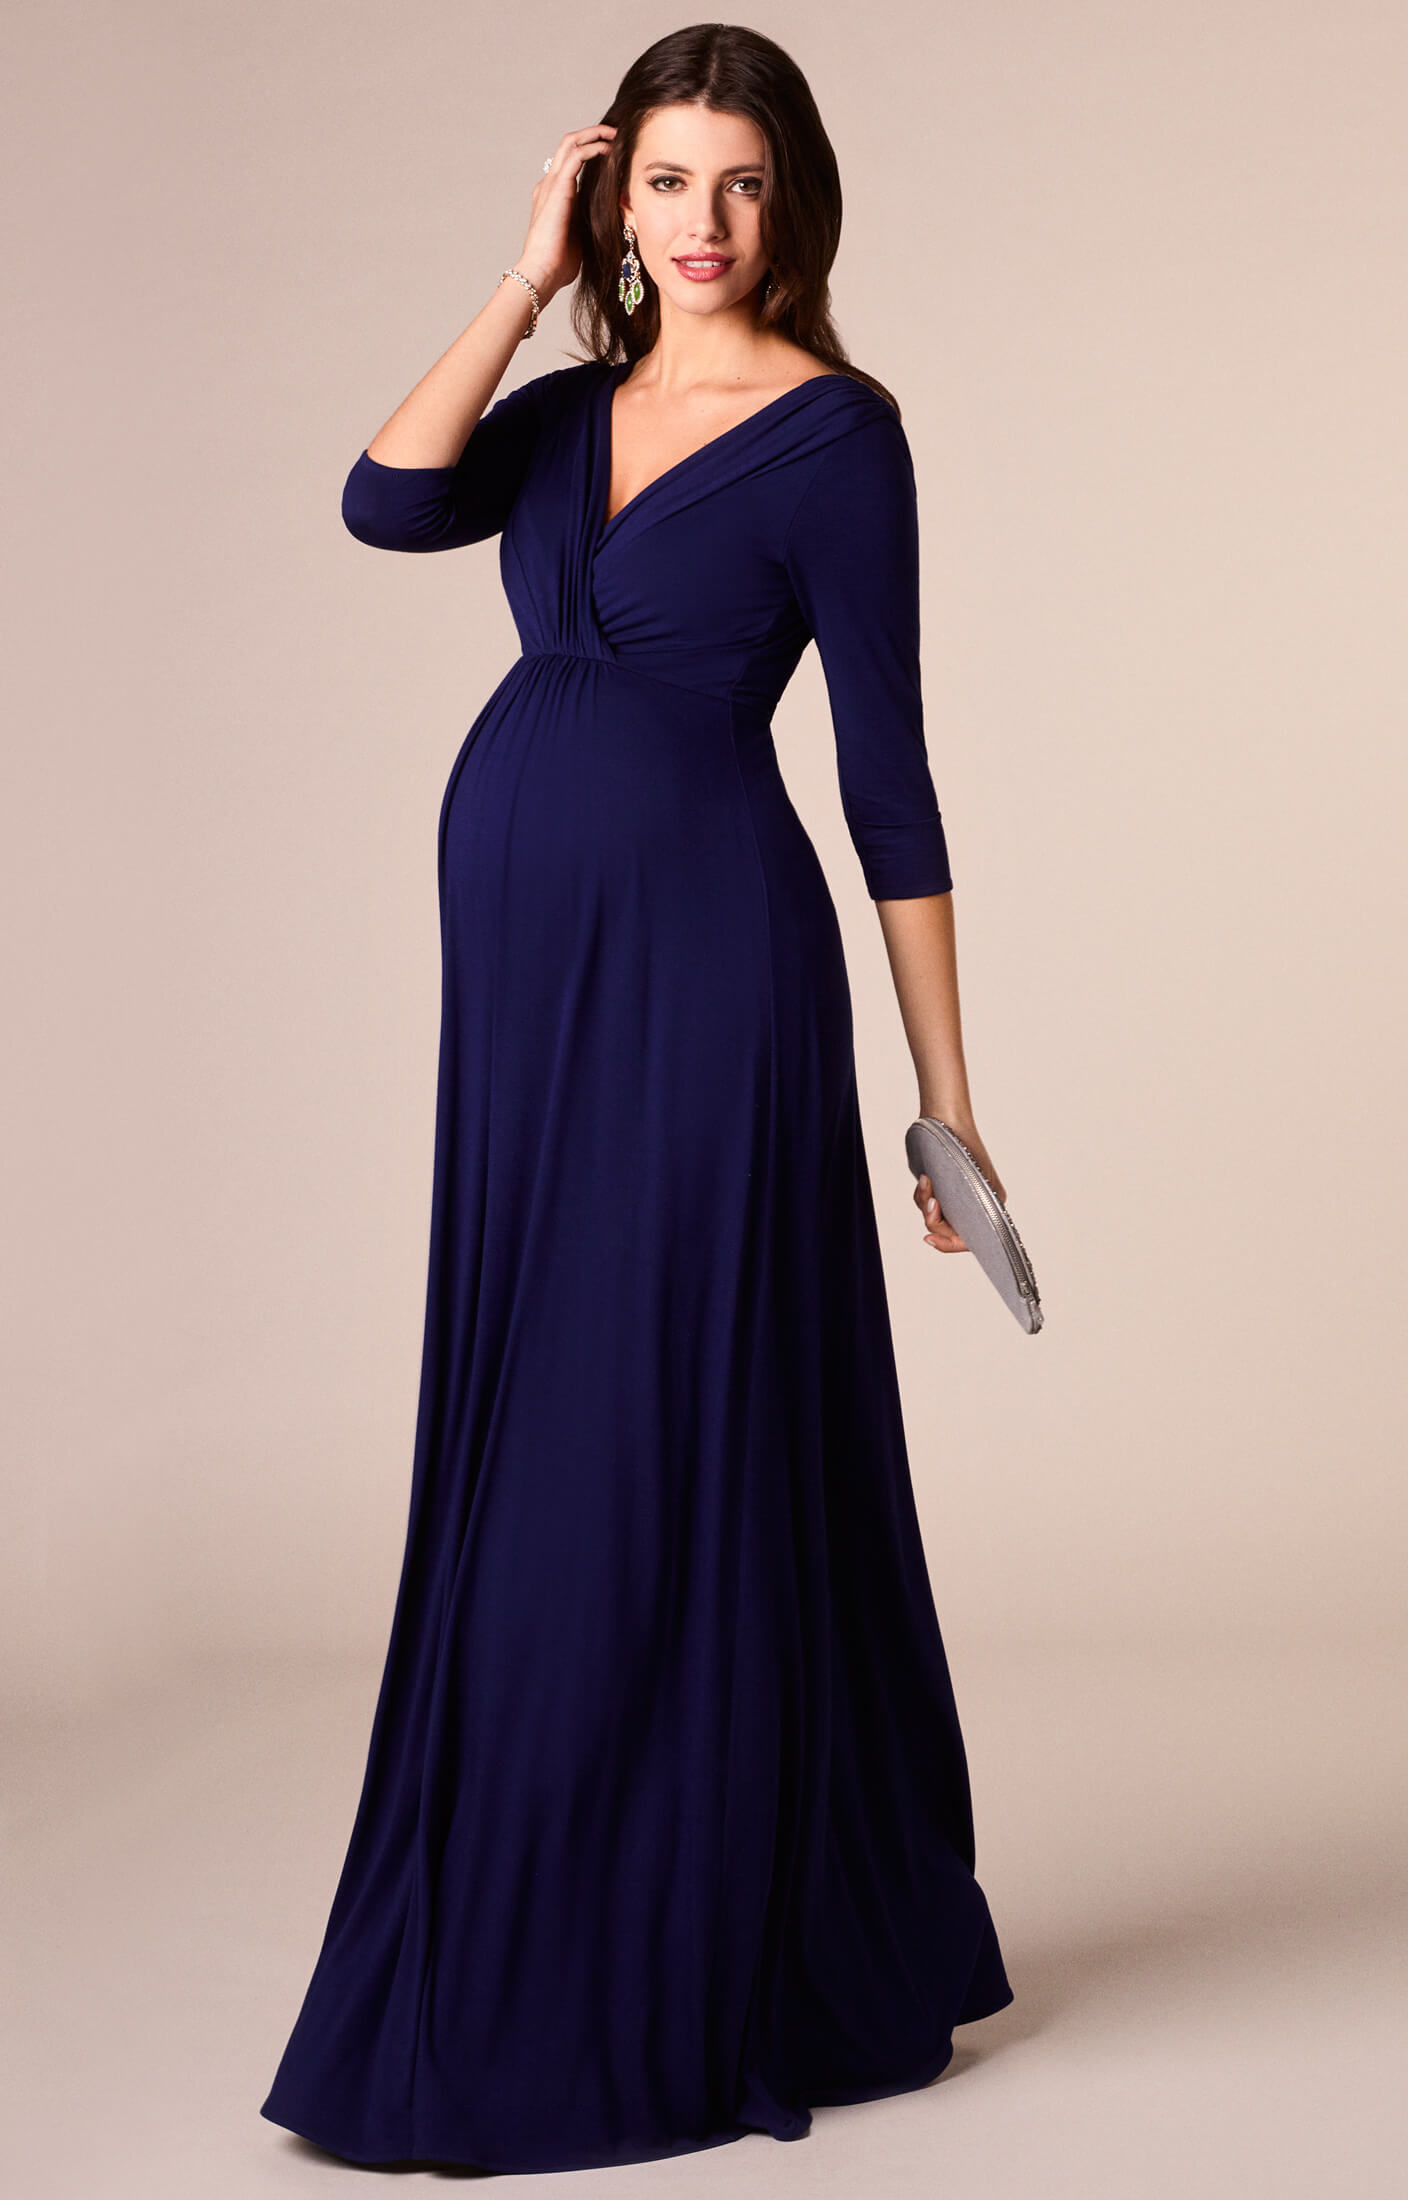 Willow Maternity Gown Long Eclipse Blue - Maternity Wedding Dresses